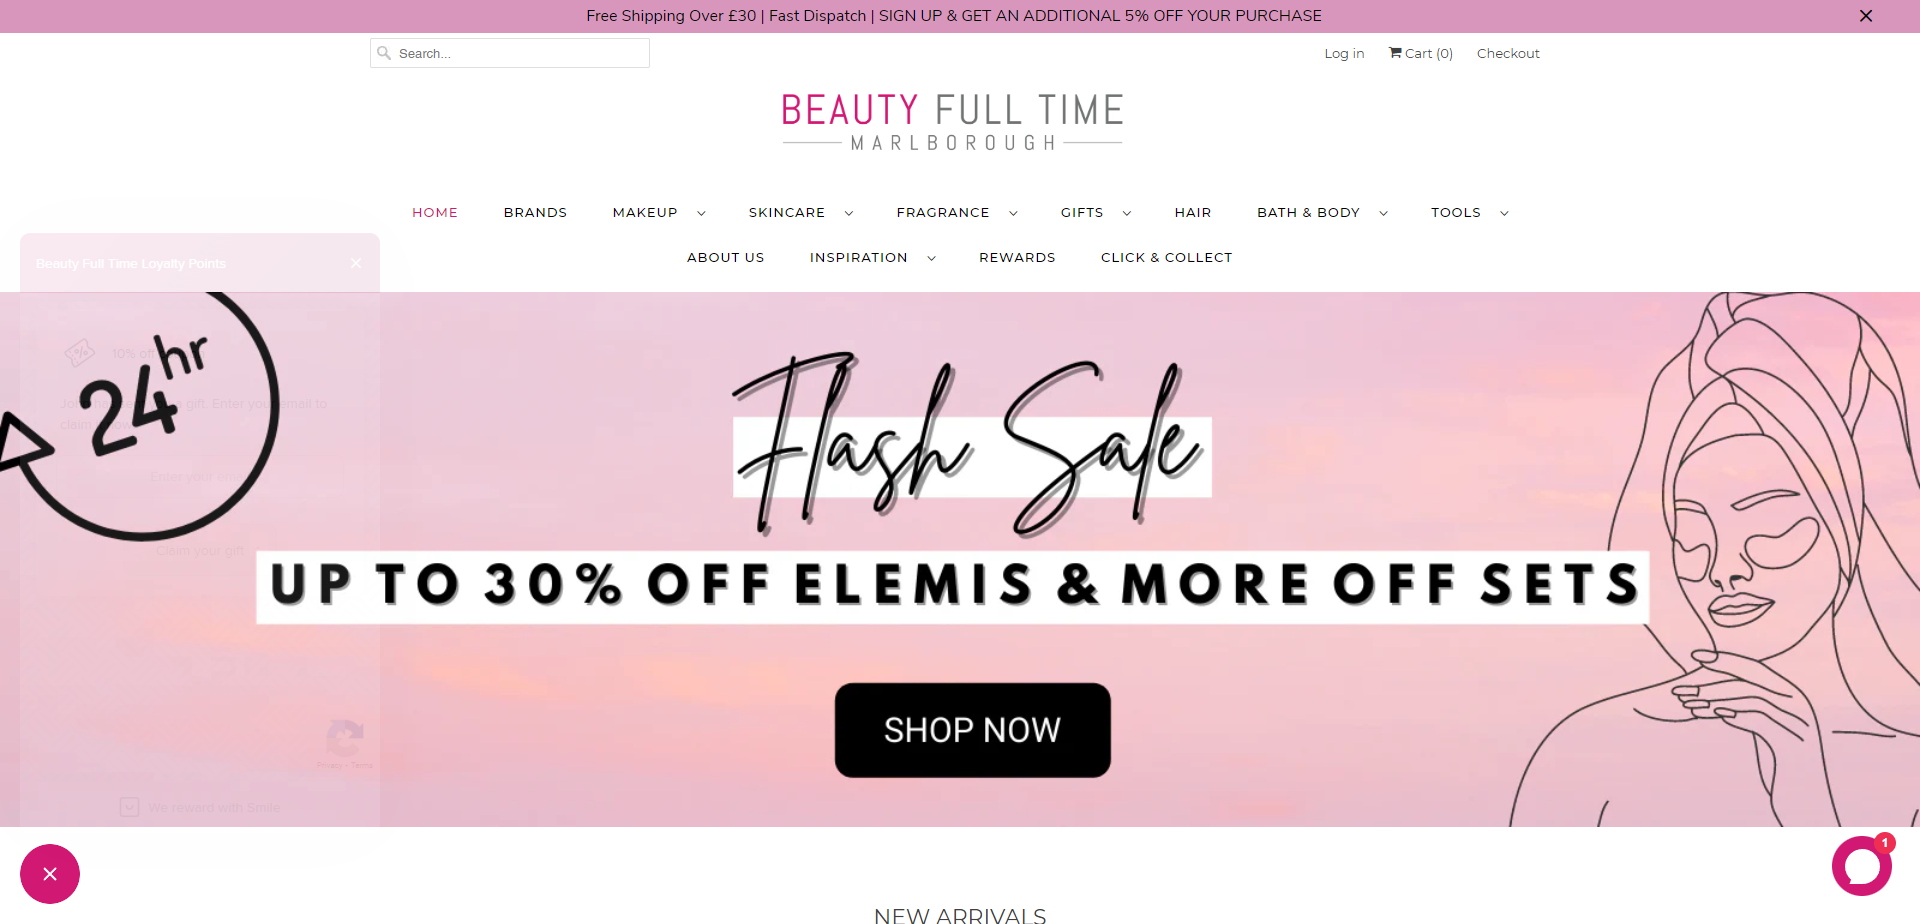 Landing Page for Beauty Full Time